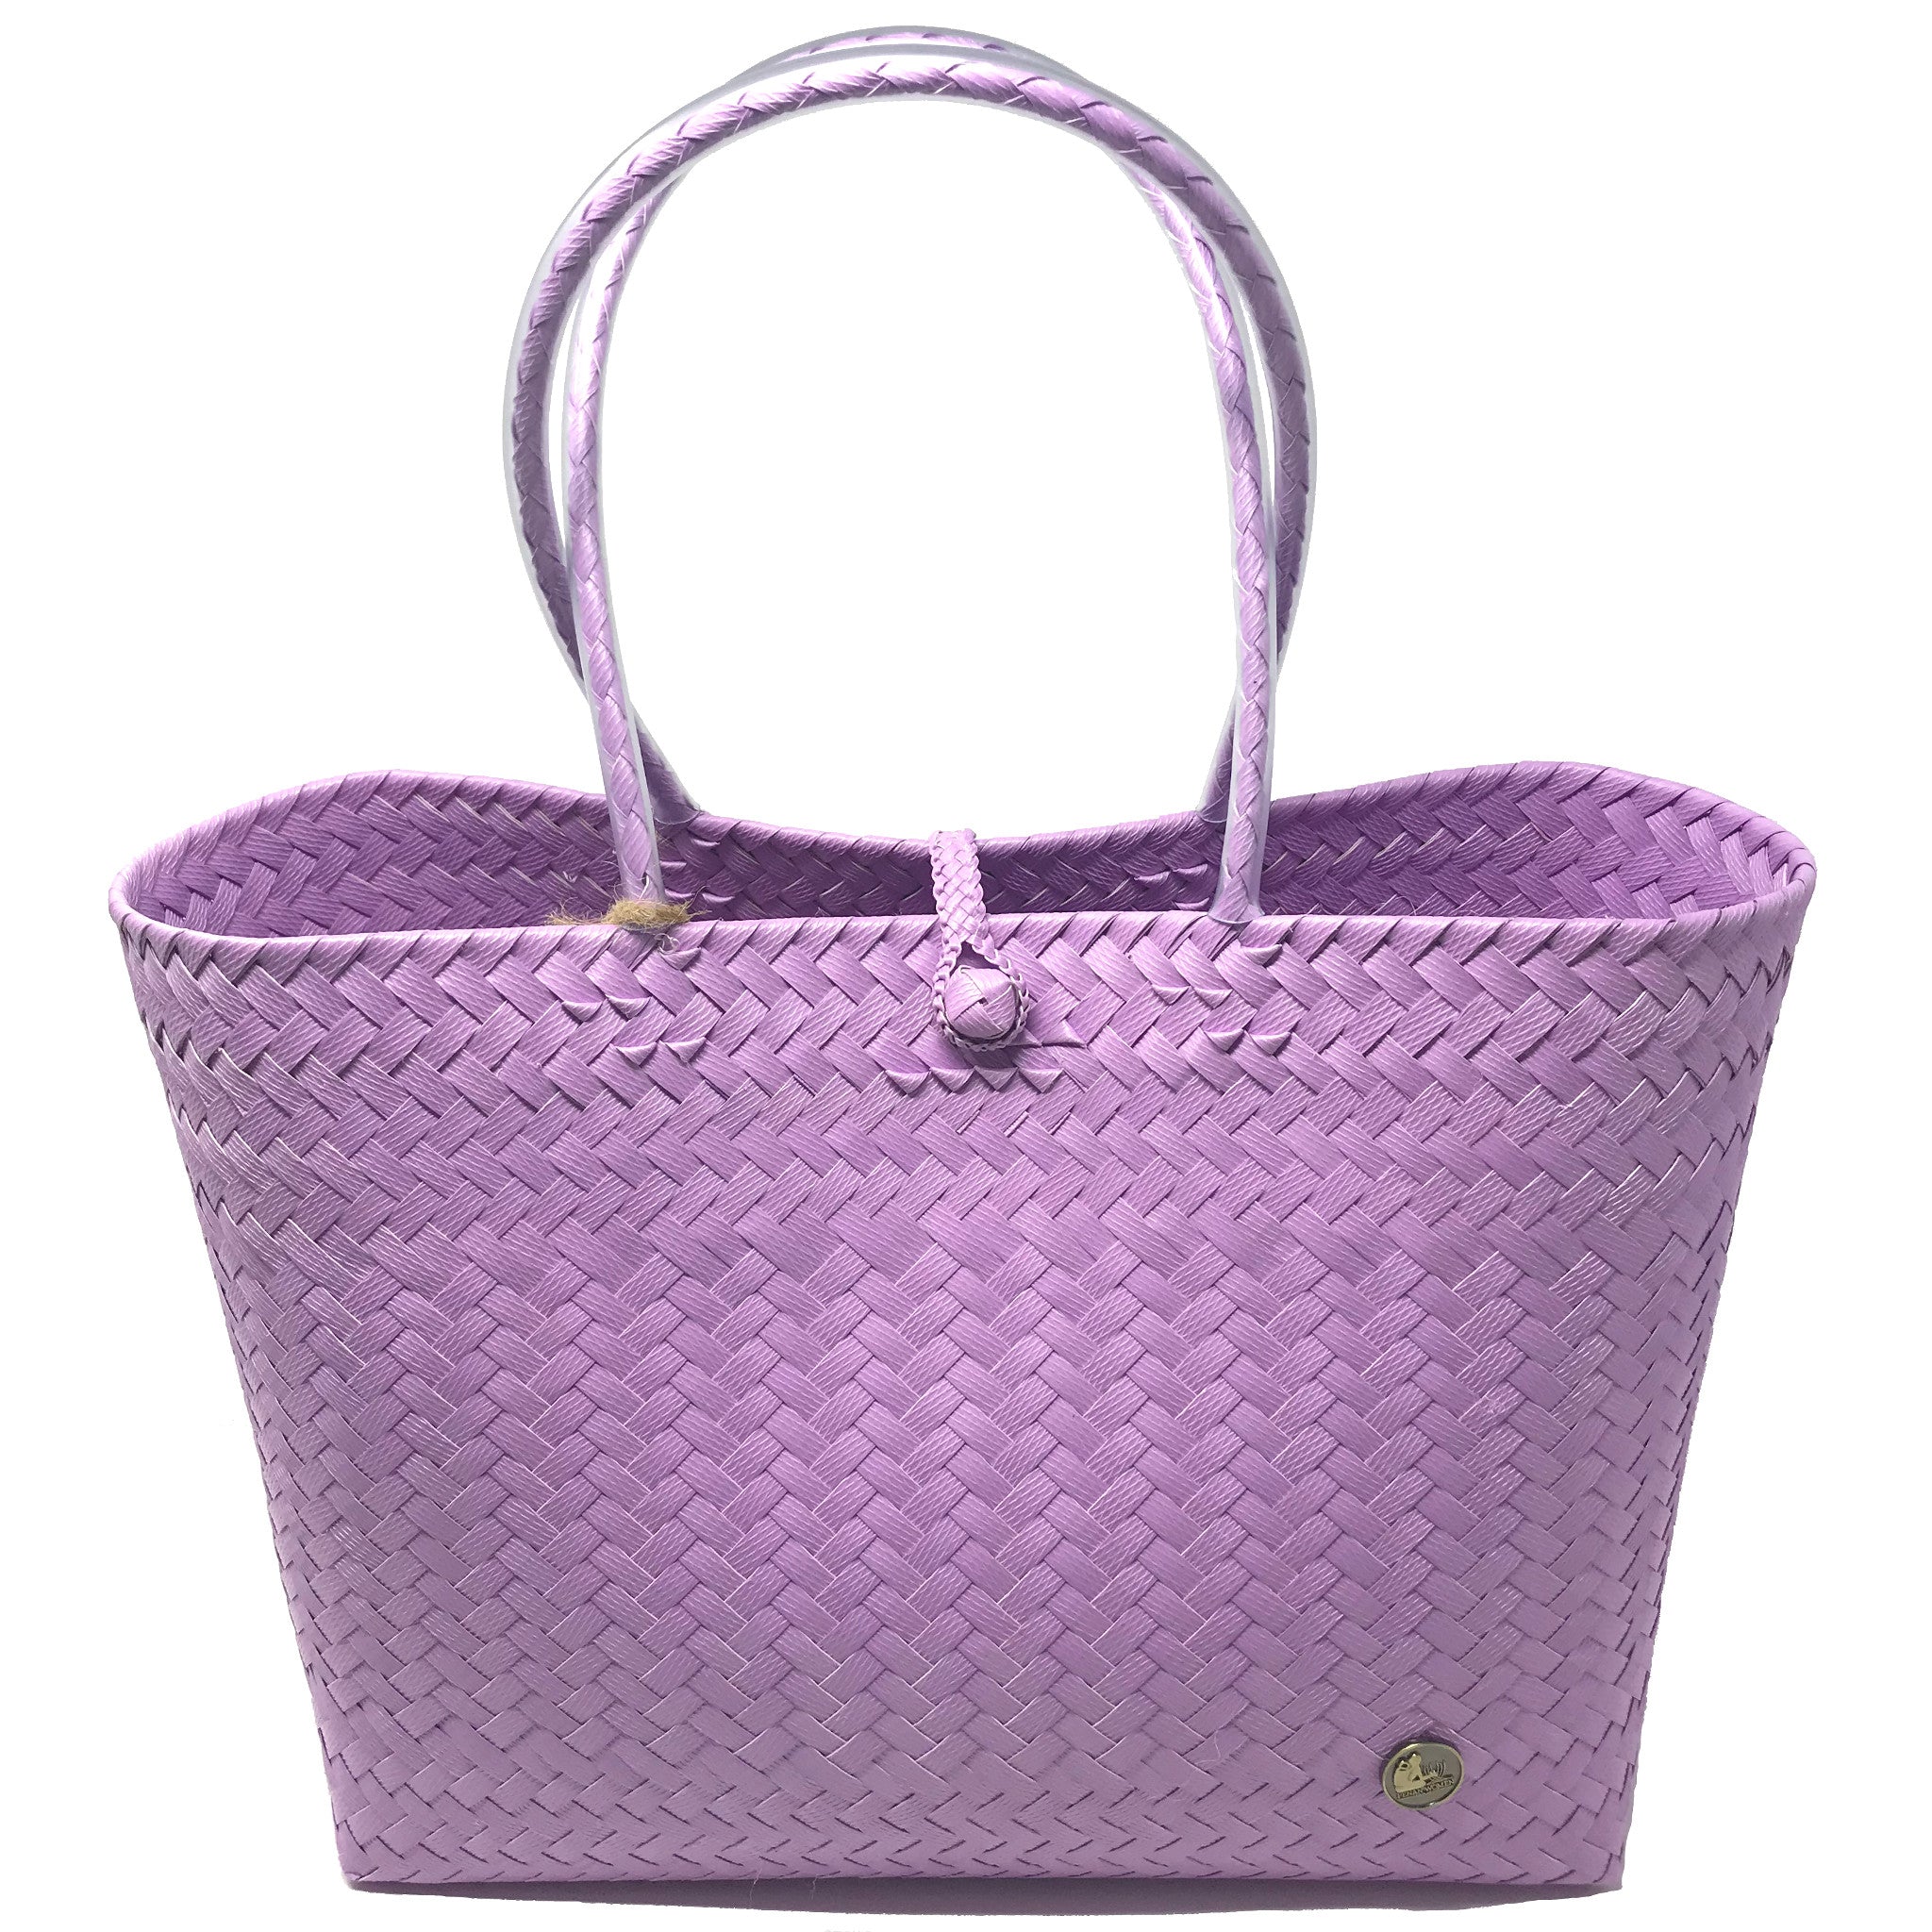 Lavender medium size tote bag facing the front.